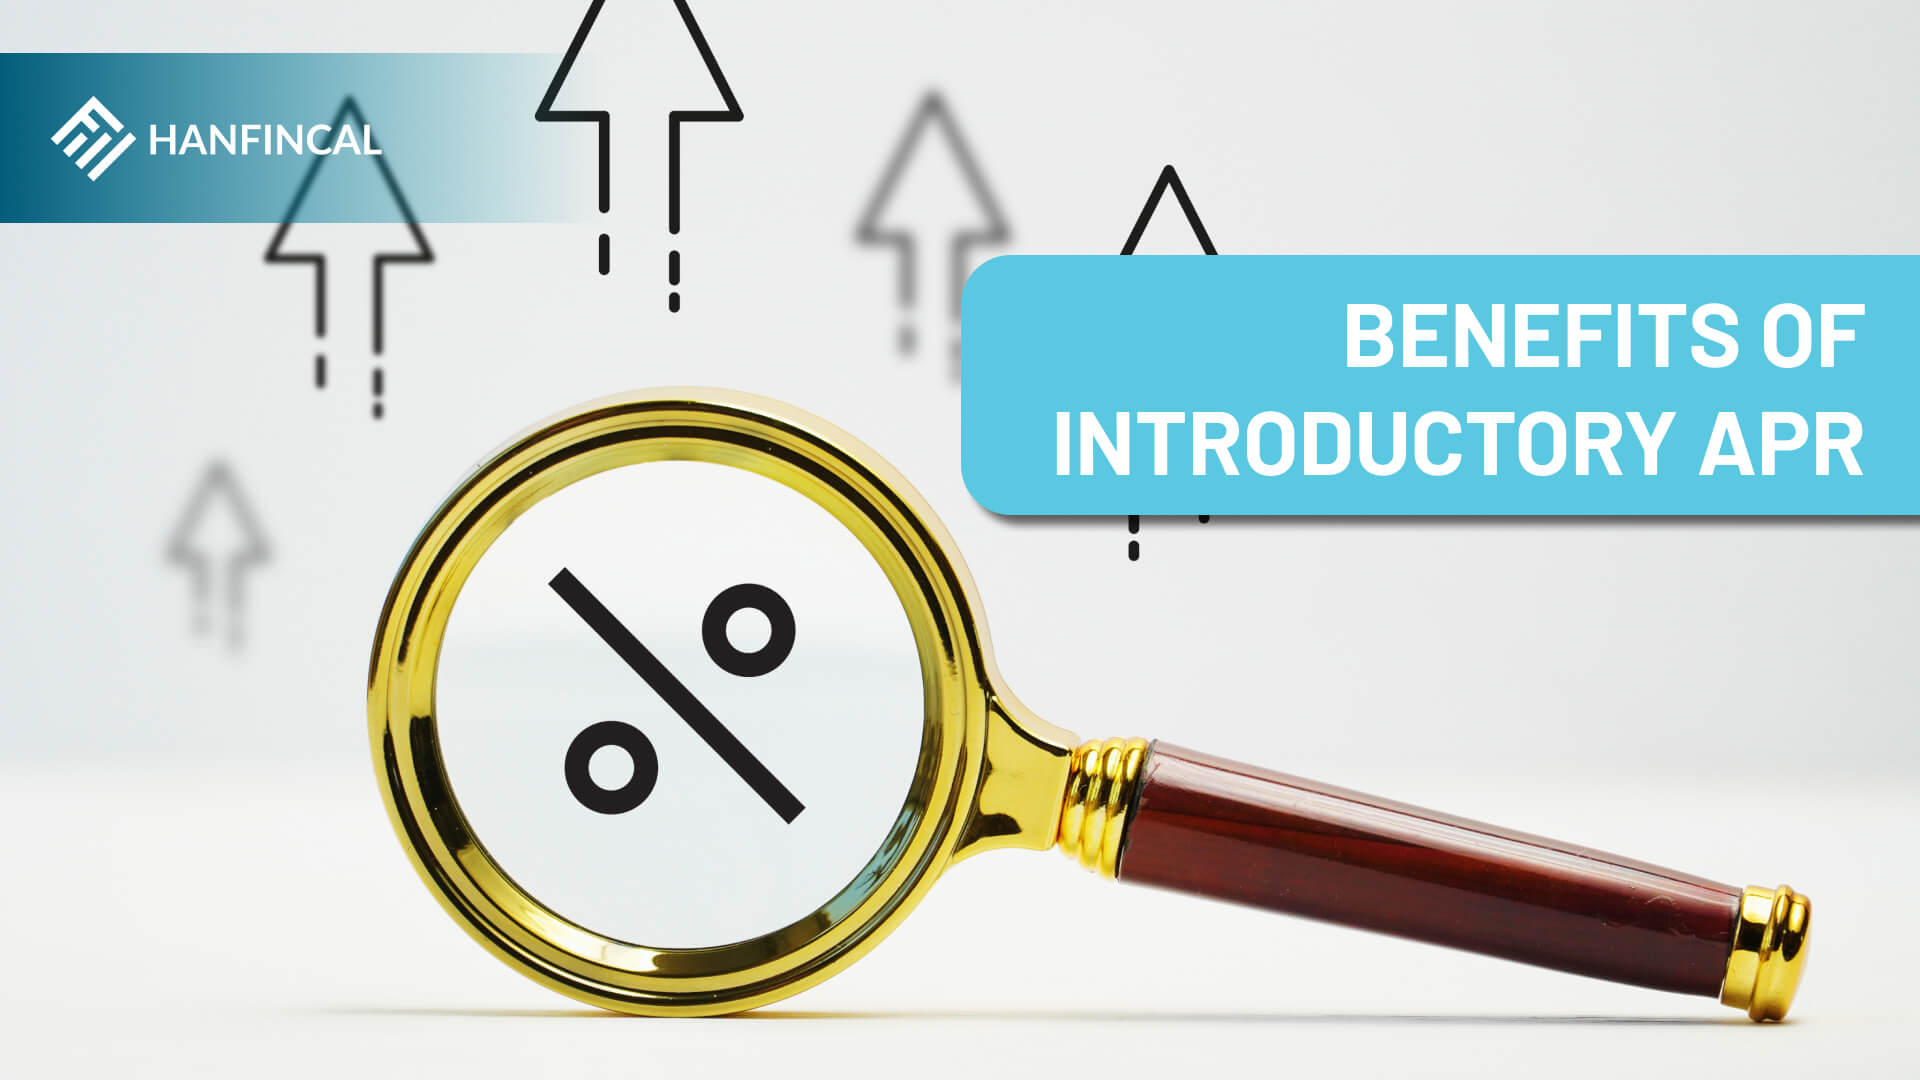 Benefits of introductory APR